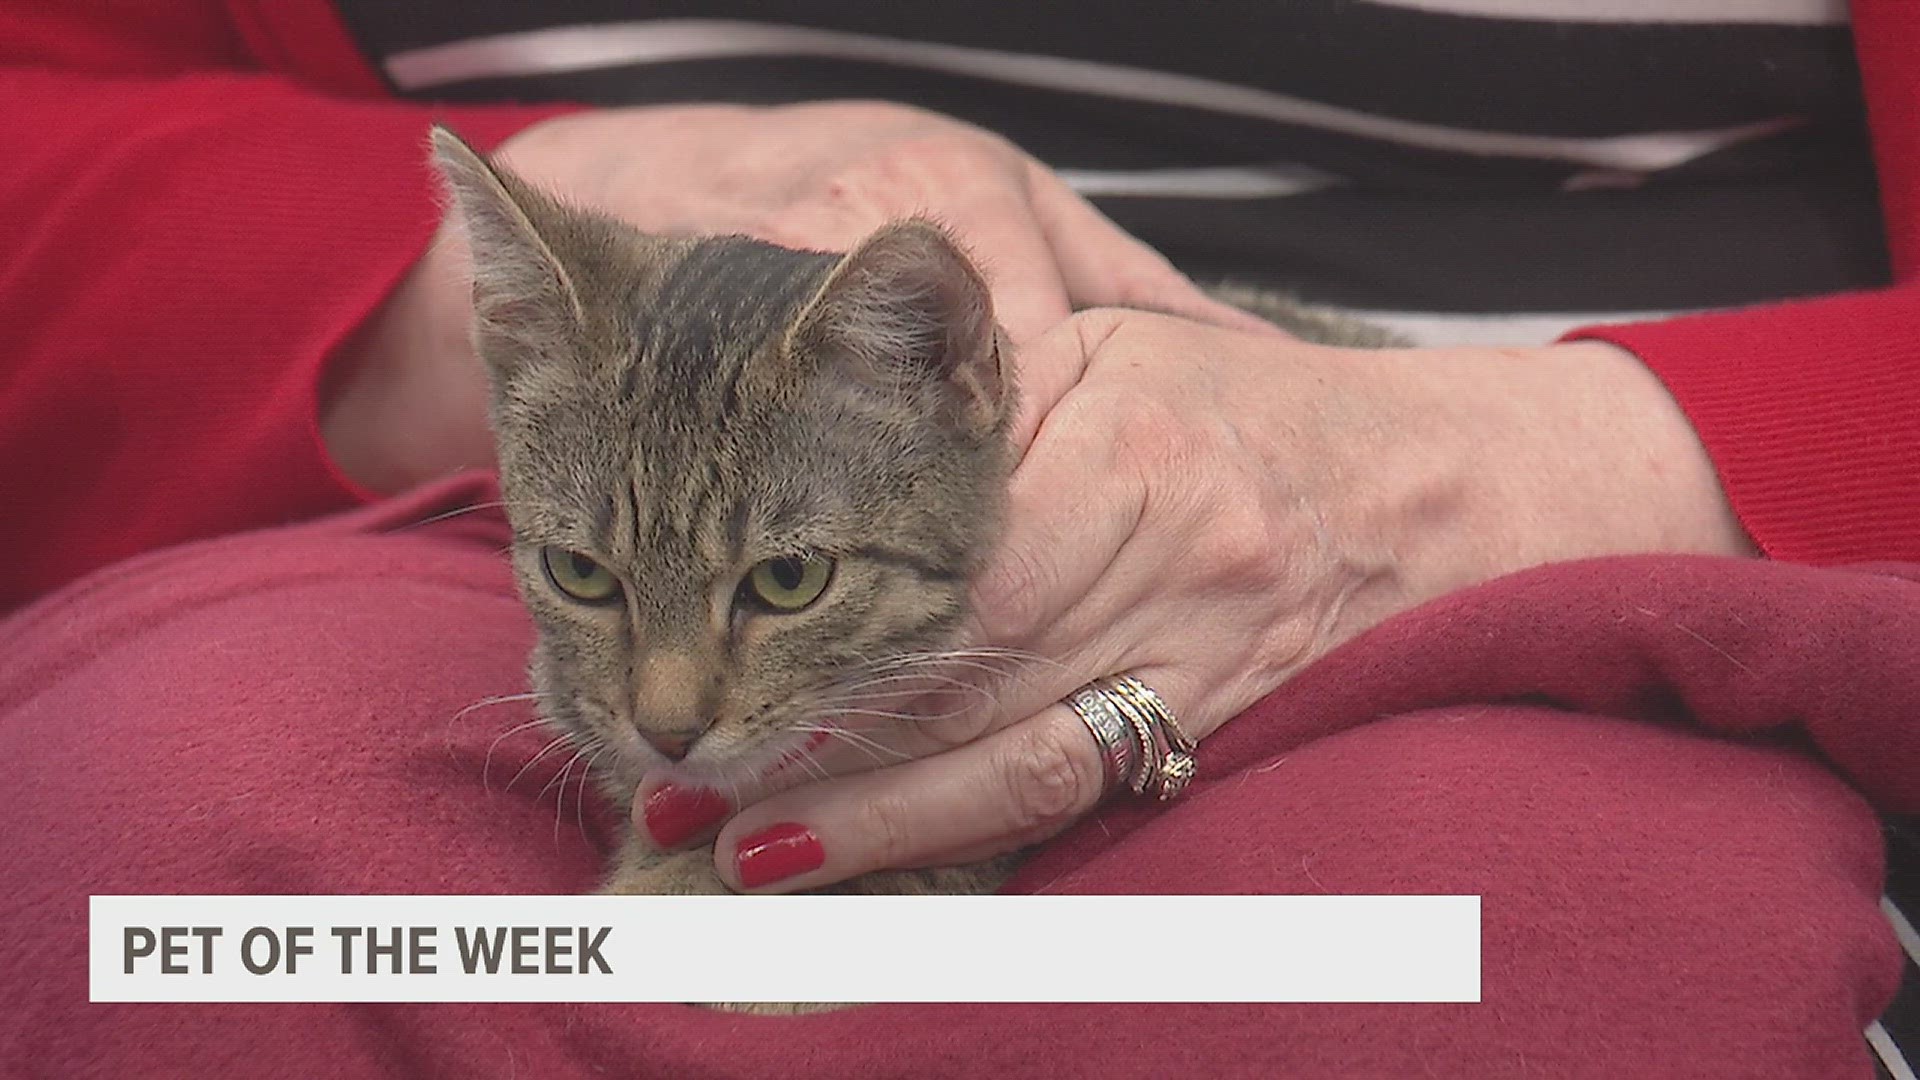 Patti McRae from the Quad City Animal Welfare Center brings in a feature pet each week to help get pets adopted.